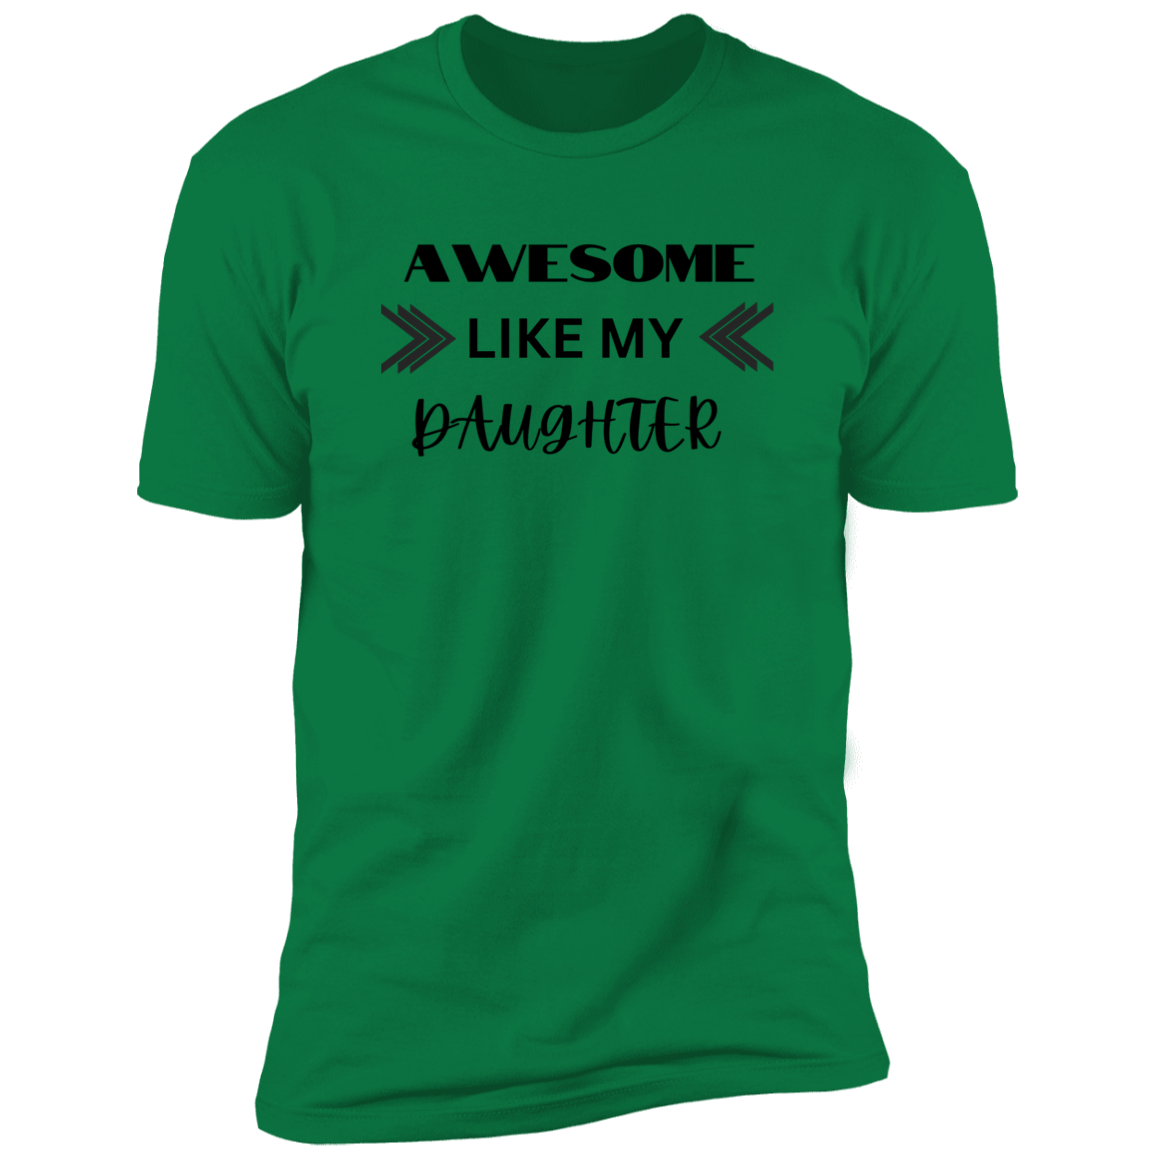 Awesome like my daughter Premium Short Sleeve Tee